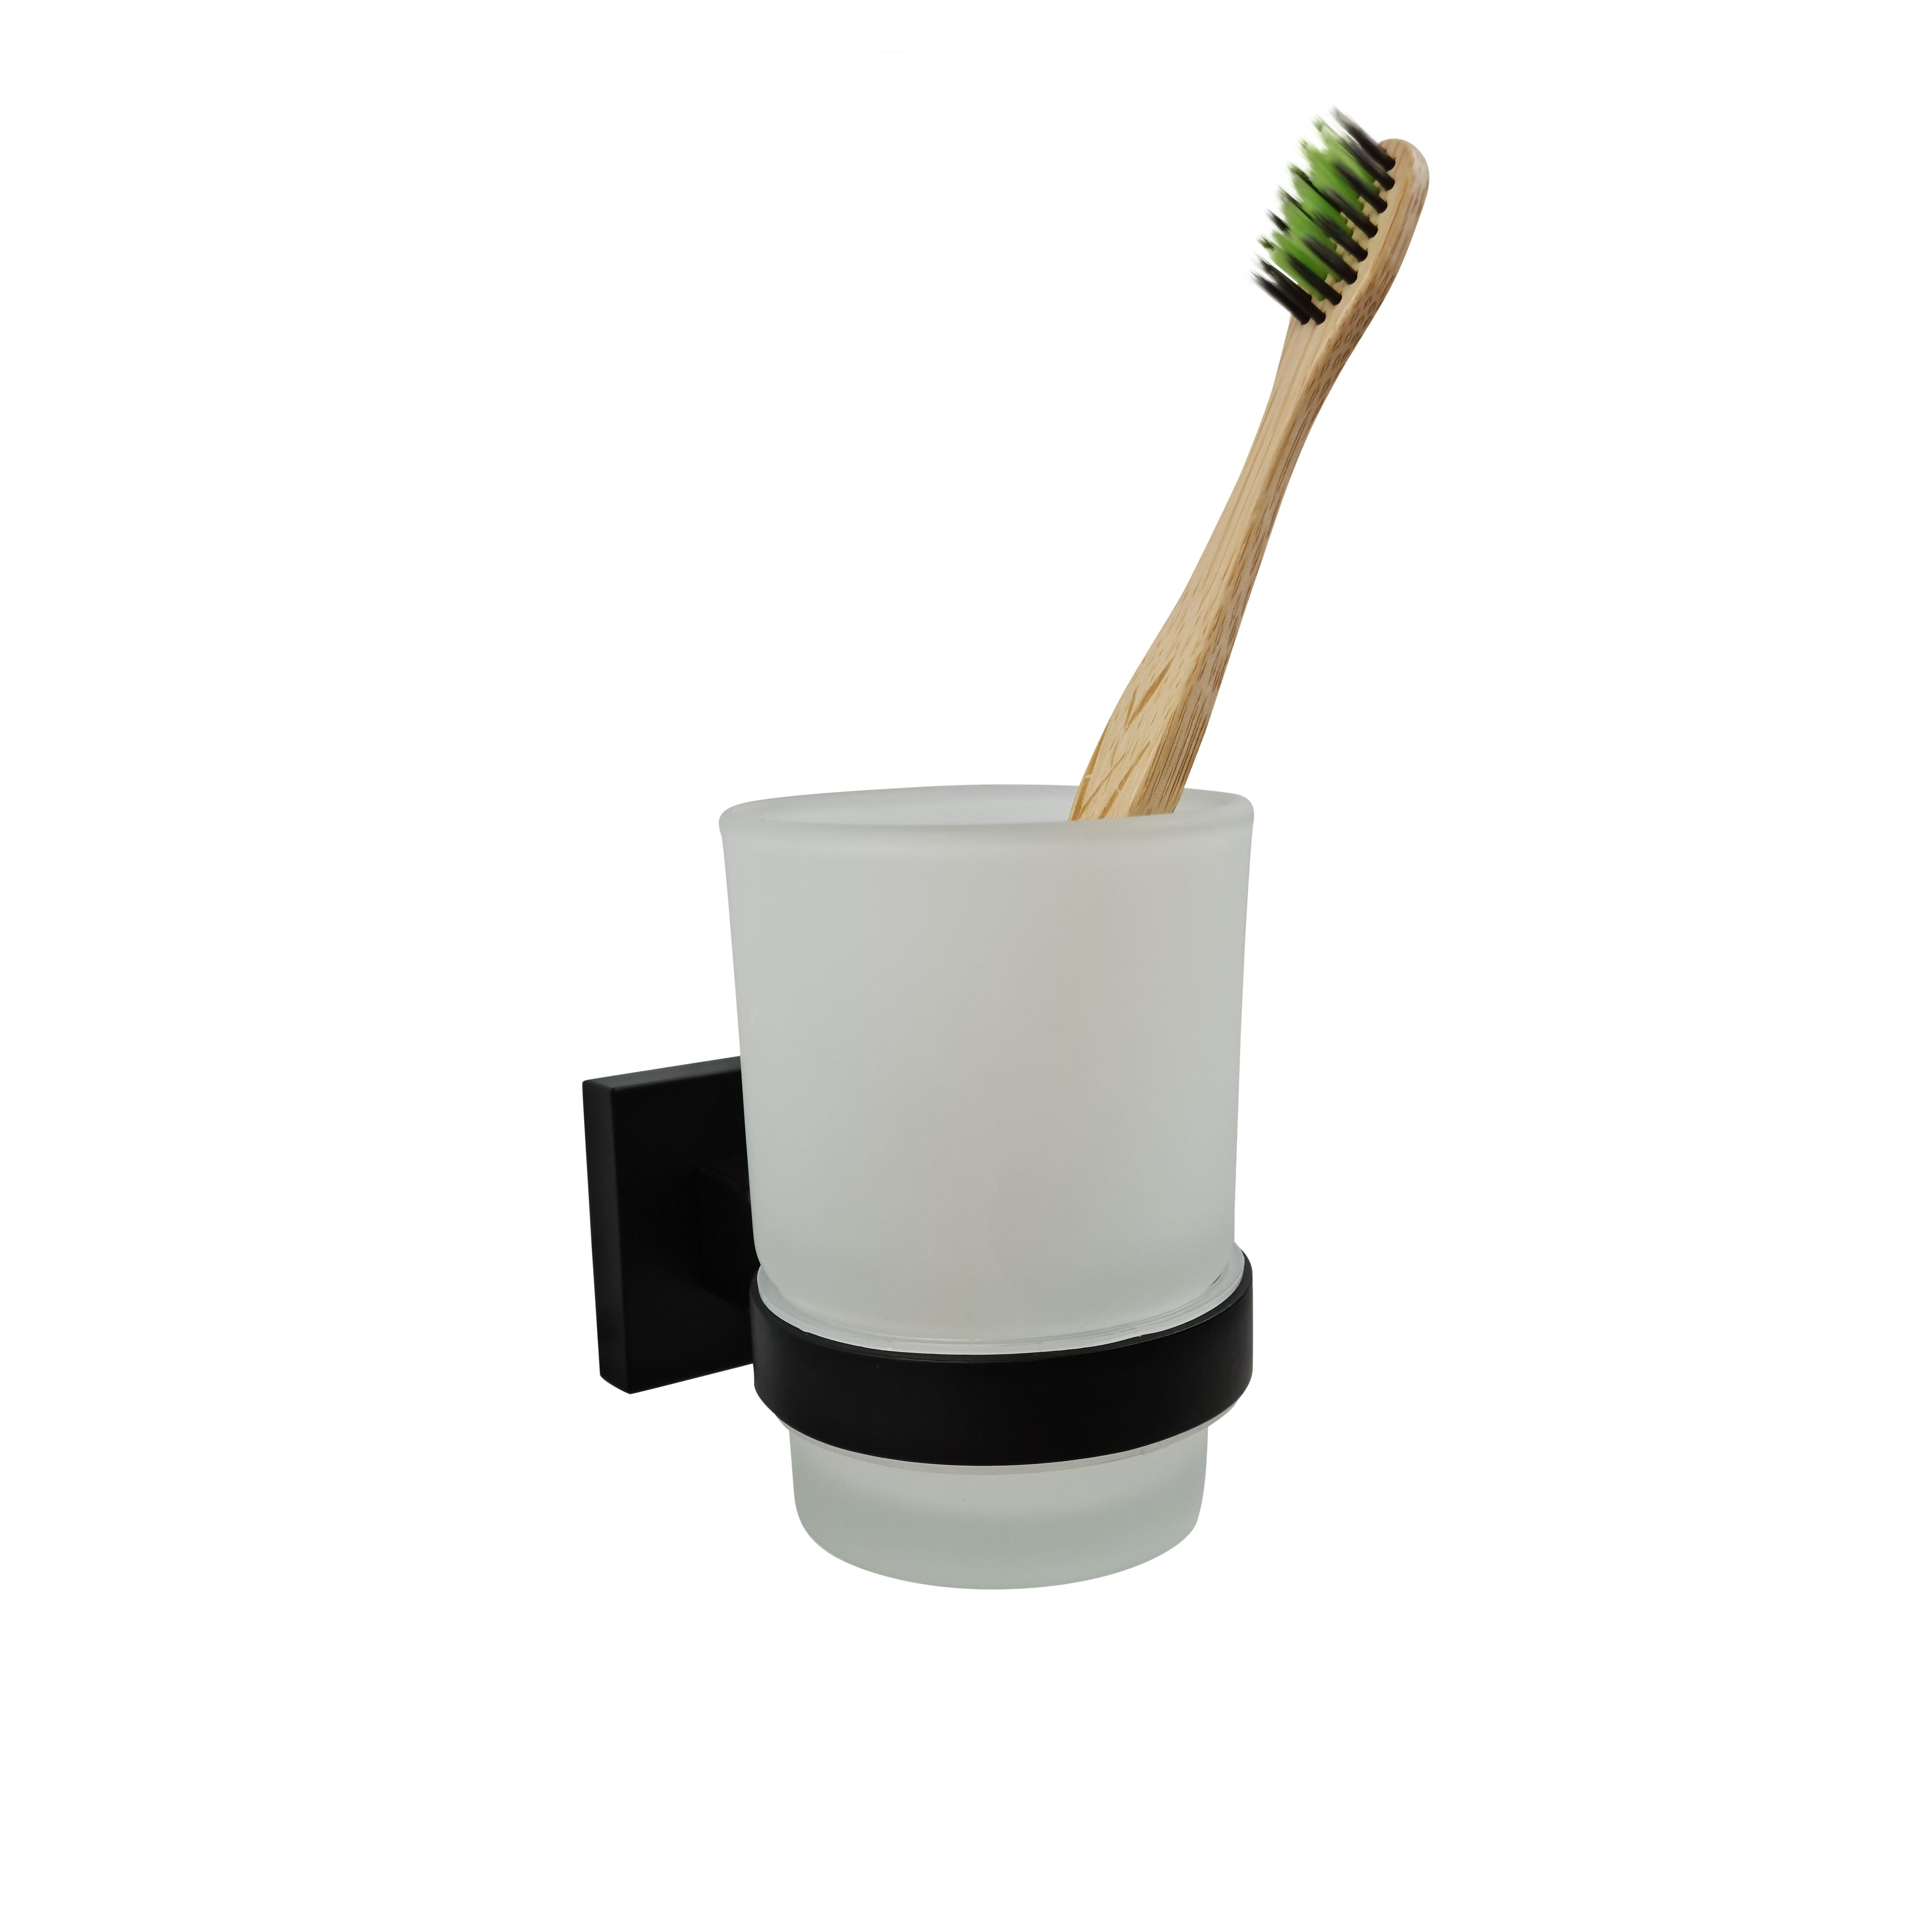 Black Toothbrush Holder with Glass Cup Wall Mounted Bathroom Accessory - image 1